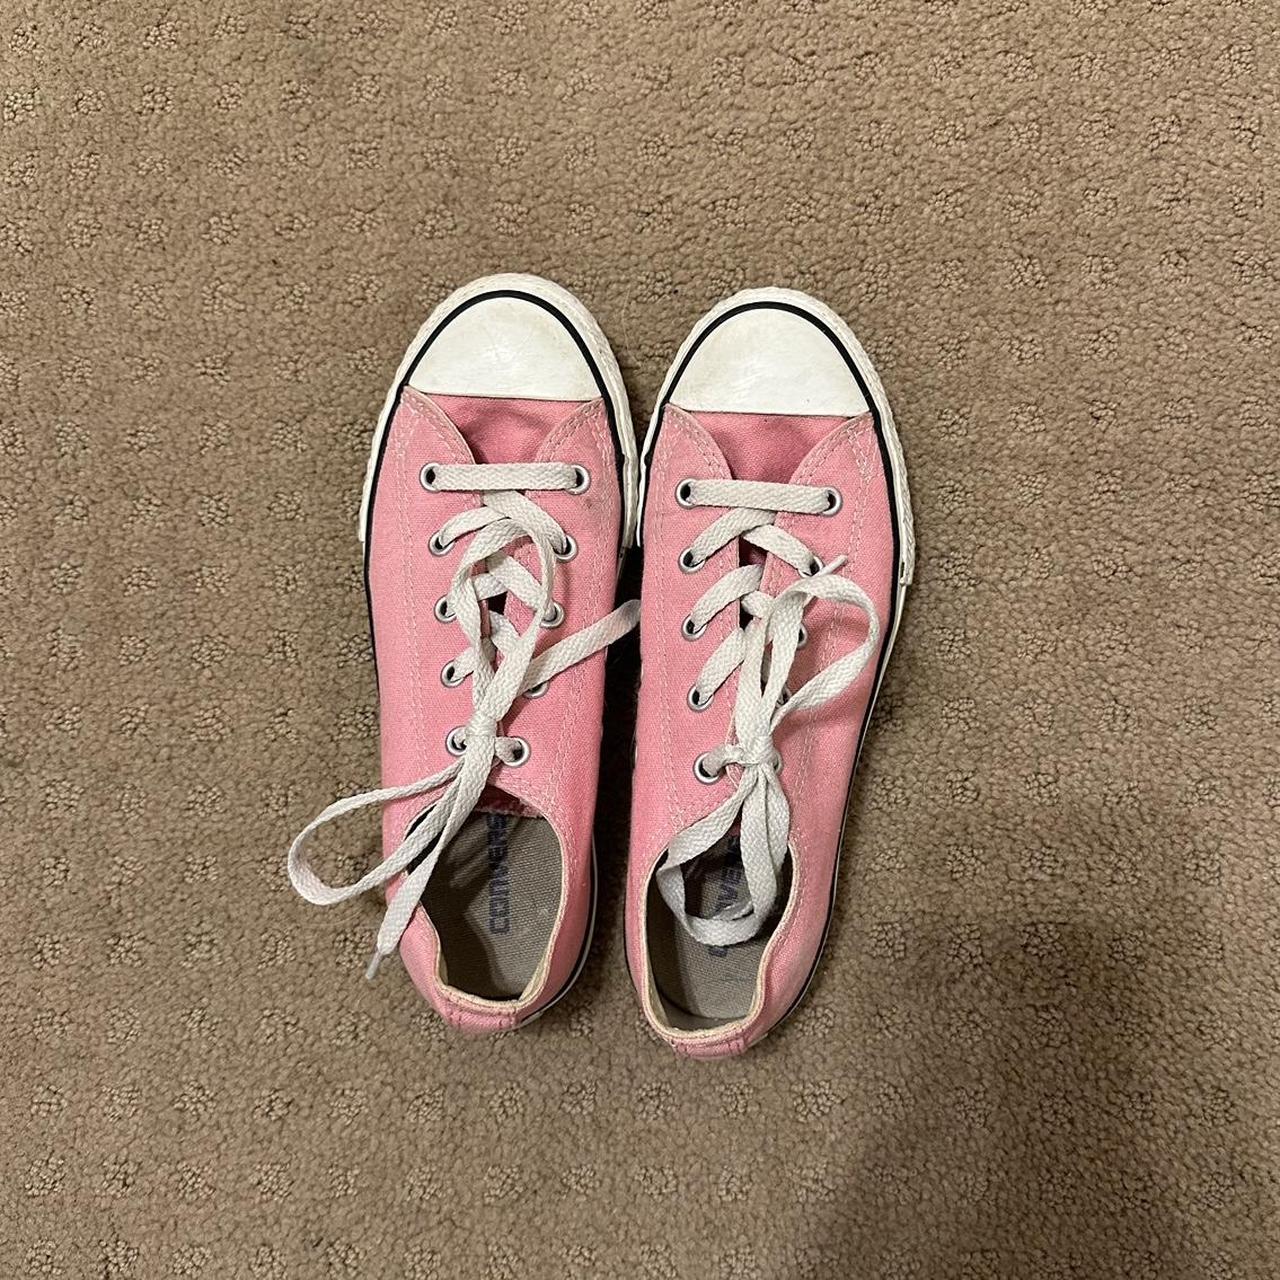 Converse Women's Pink and White Trainers | Depop